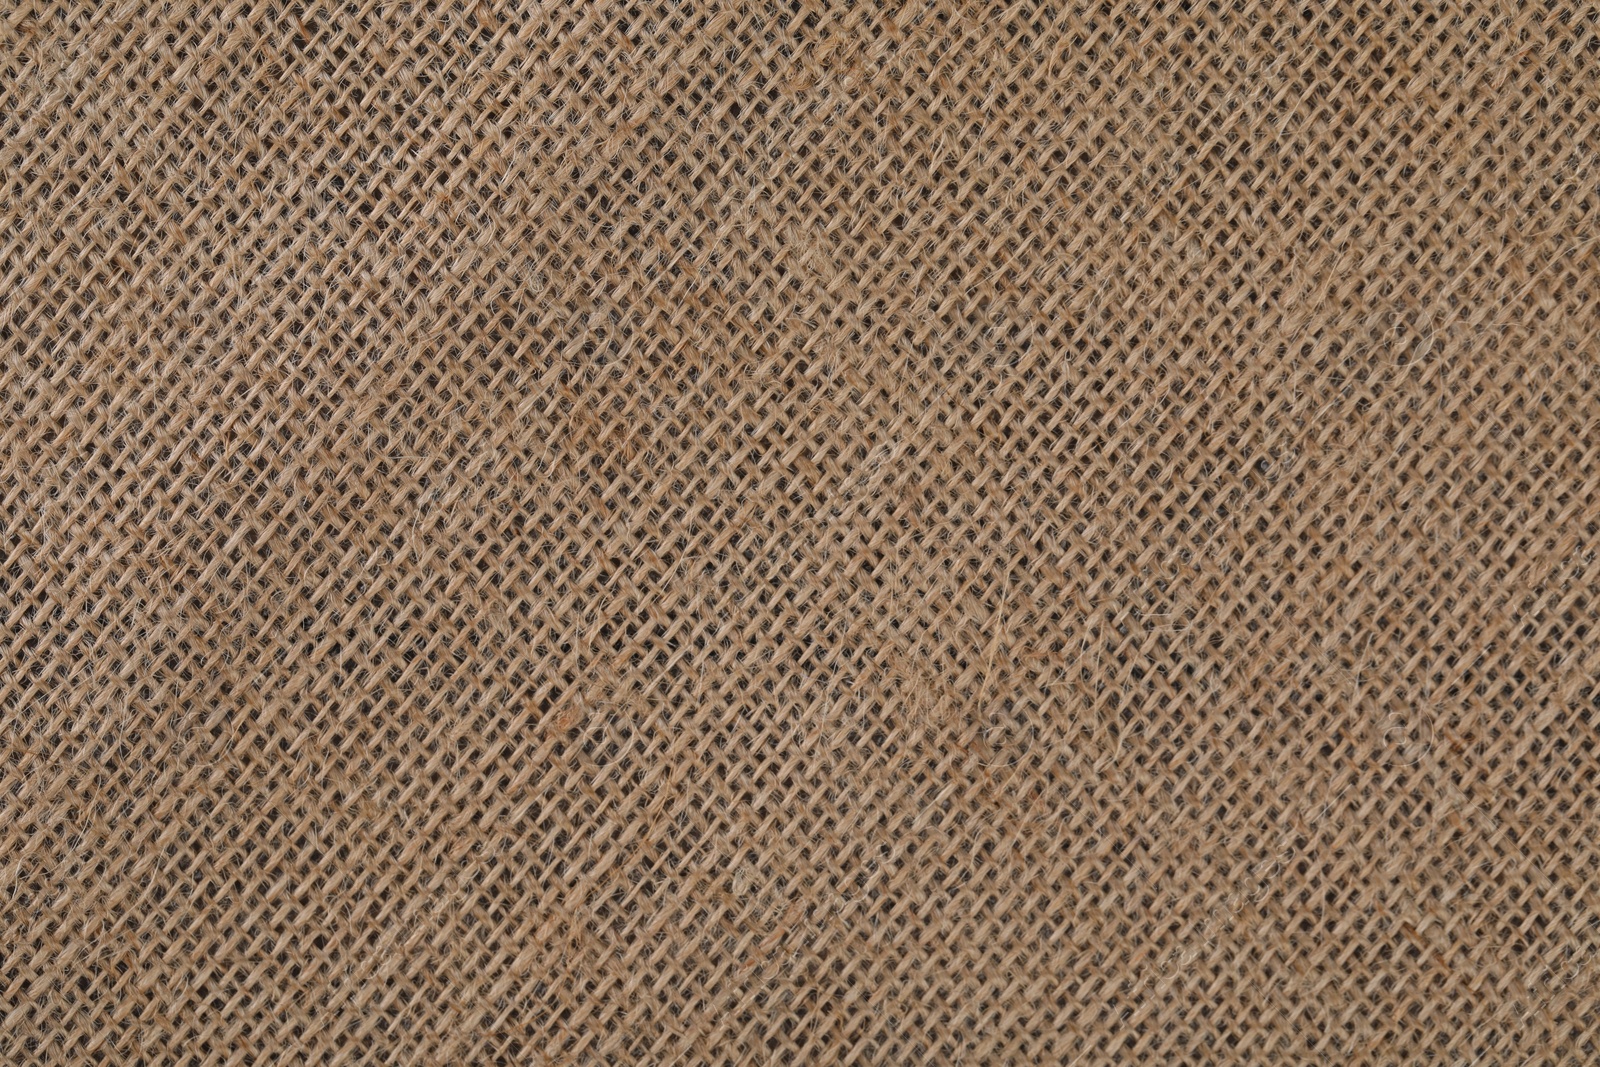 Photo of Brown burlap fabric as background, top view